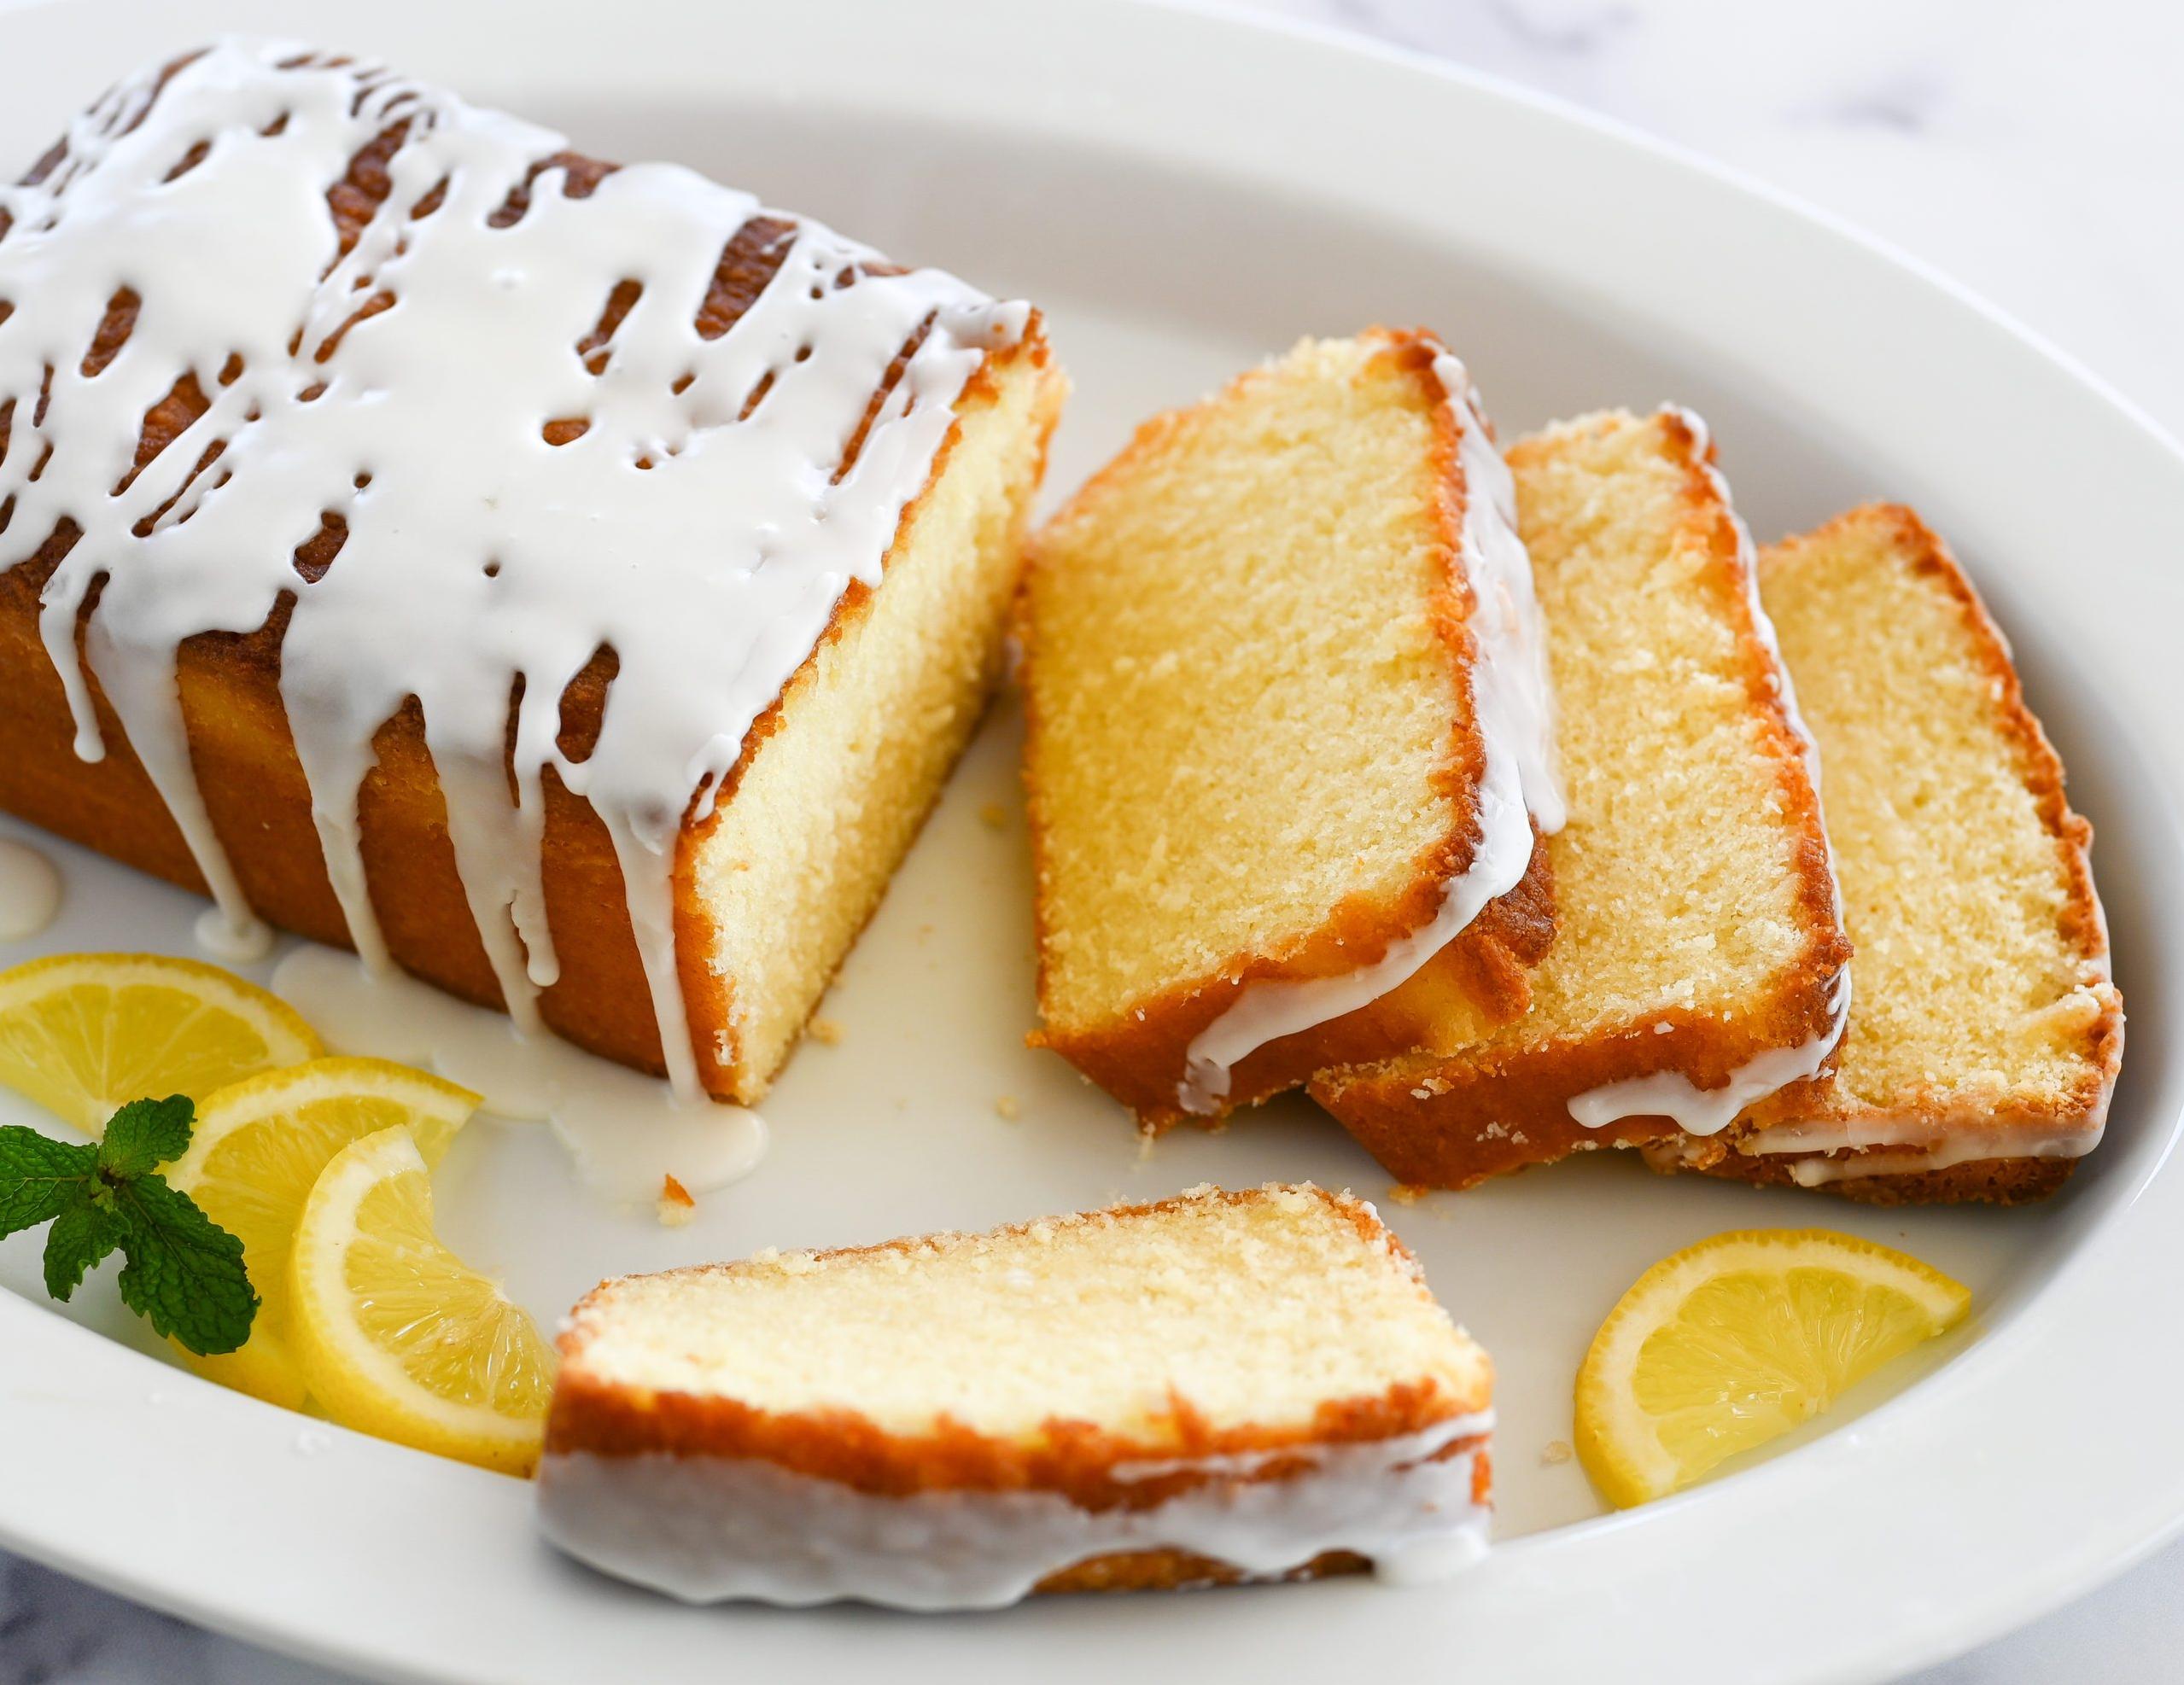  Sweet, tangy, and utterly delicious, this pound cake will make your taste buds dance with joy.